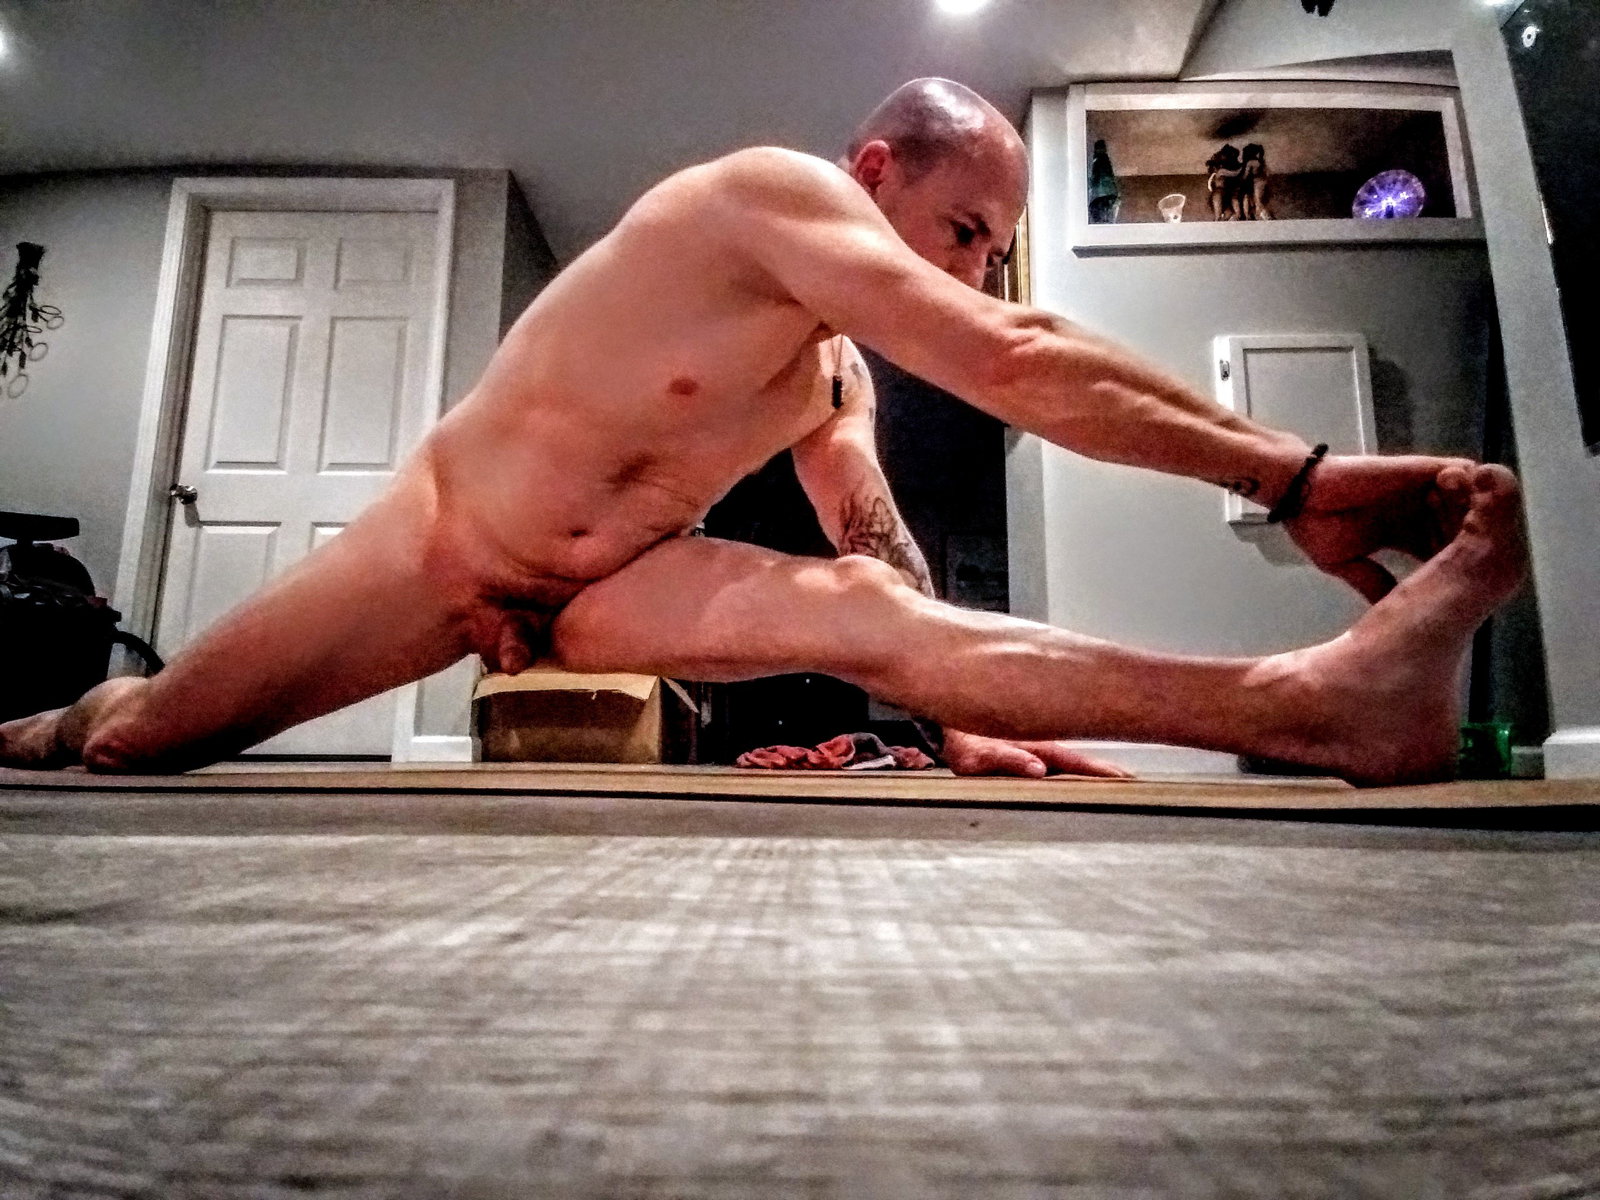 Photo by ArtOfNakedYoga with the username @ArtOfNakedYoga, who is a verified user,  April 8, 2019 at 11:20 AM. The post is about the topic Yoga in the nude and the text says '#nakedyoga #nudeyoga #yoga'